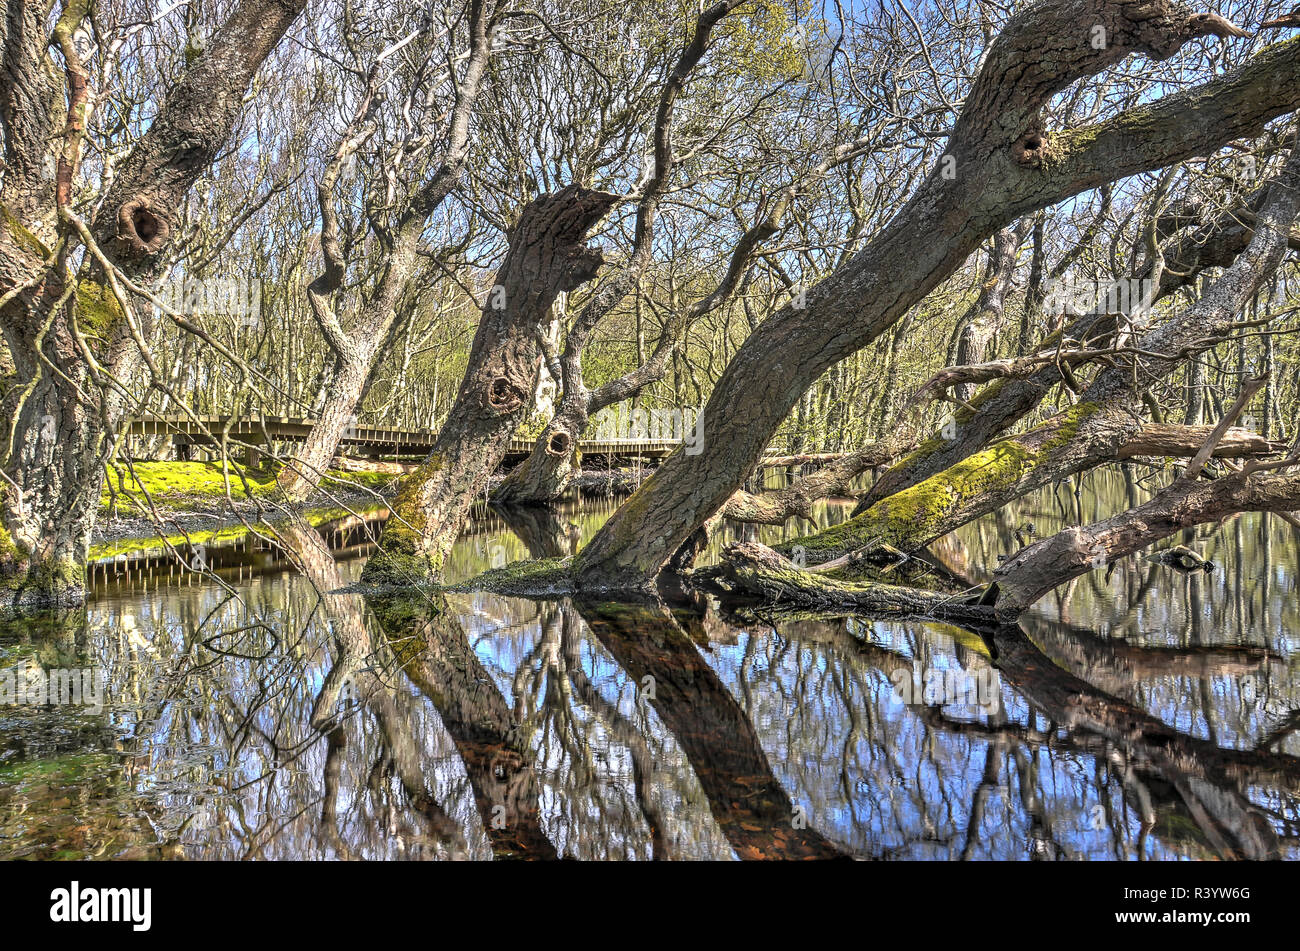 Amrum, Germany, May 2, 2015: capricious tree trunks growing from and reflecting in a pond in the nature reserve around the historical Meeram Vogelkoje Stock Photo